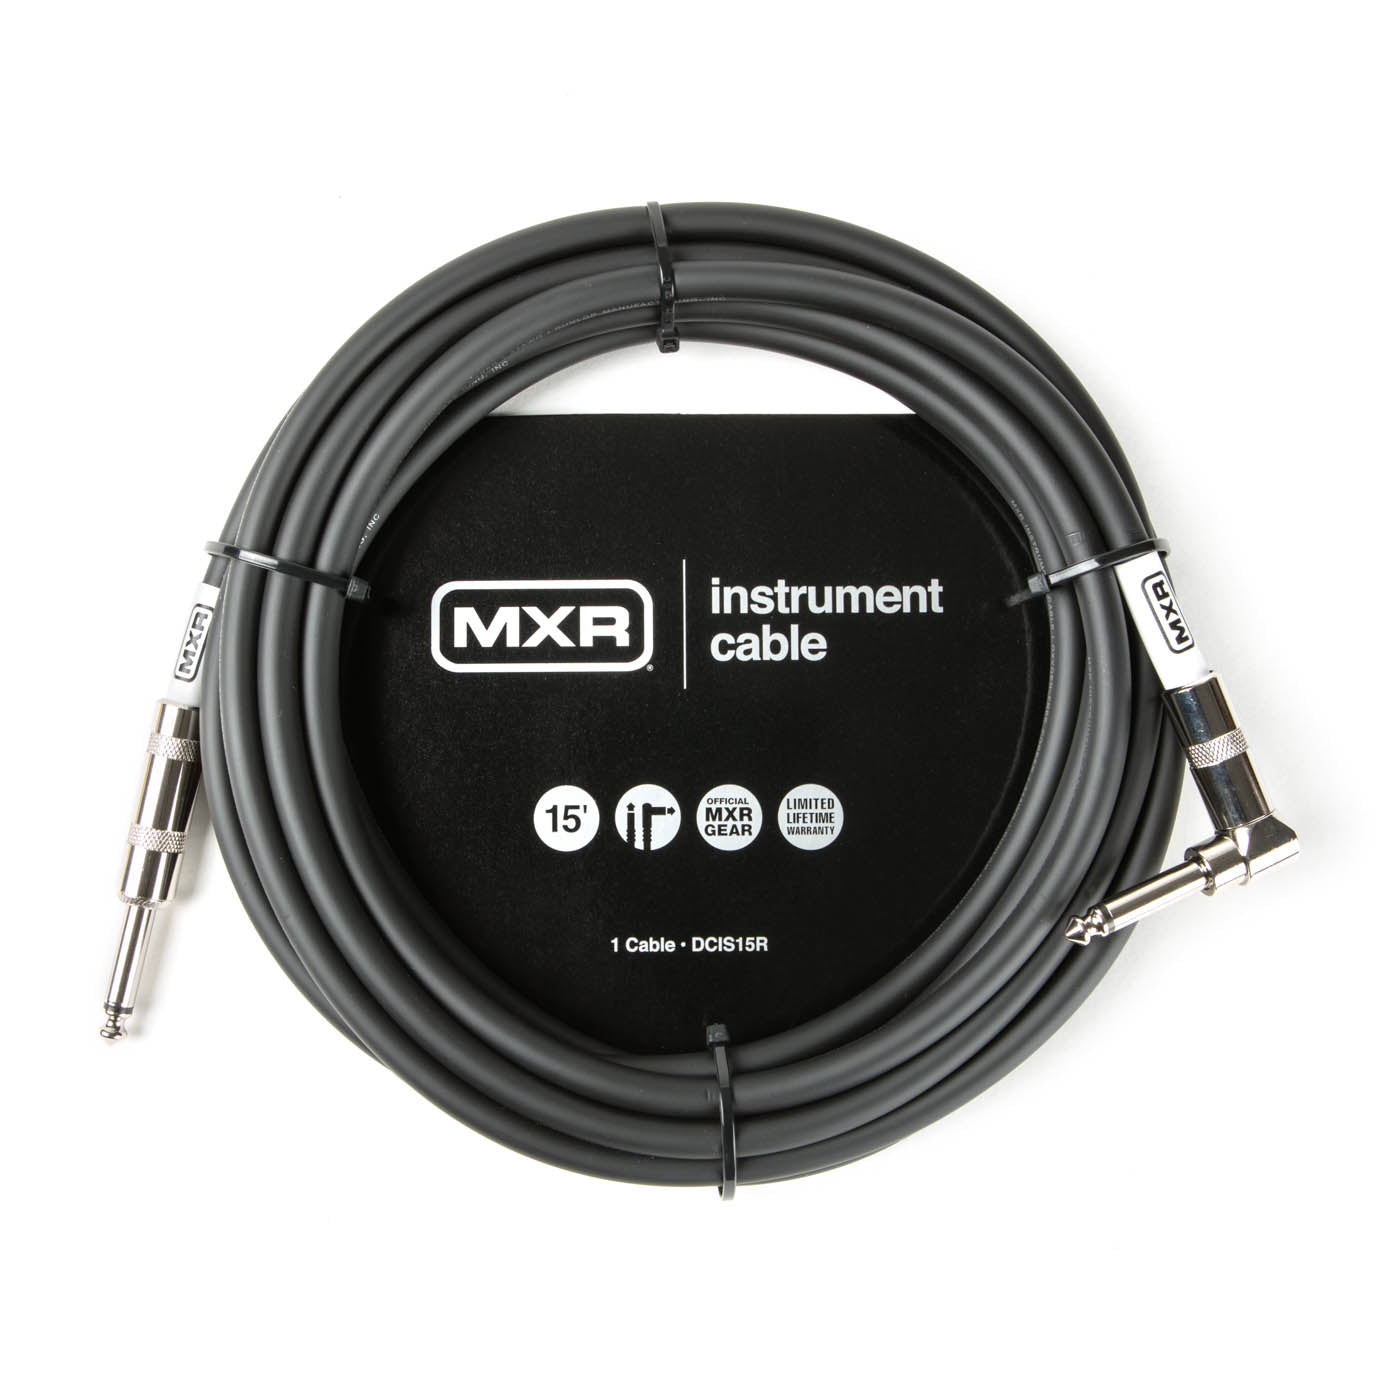 Dunlop Standard MXR Instrument Cable 15 FOOT WITH RIGHT ANGLE DCIS15R